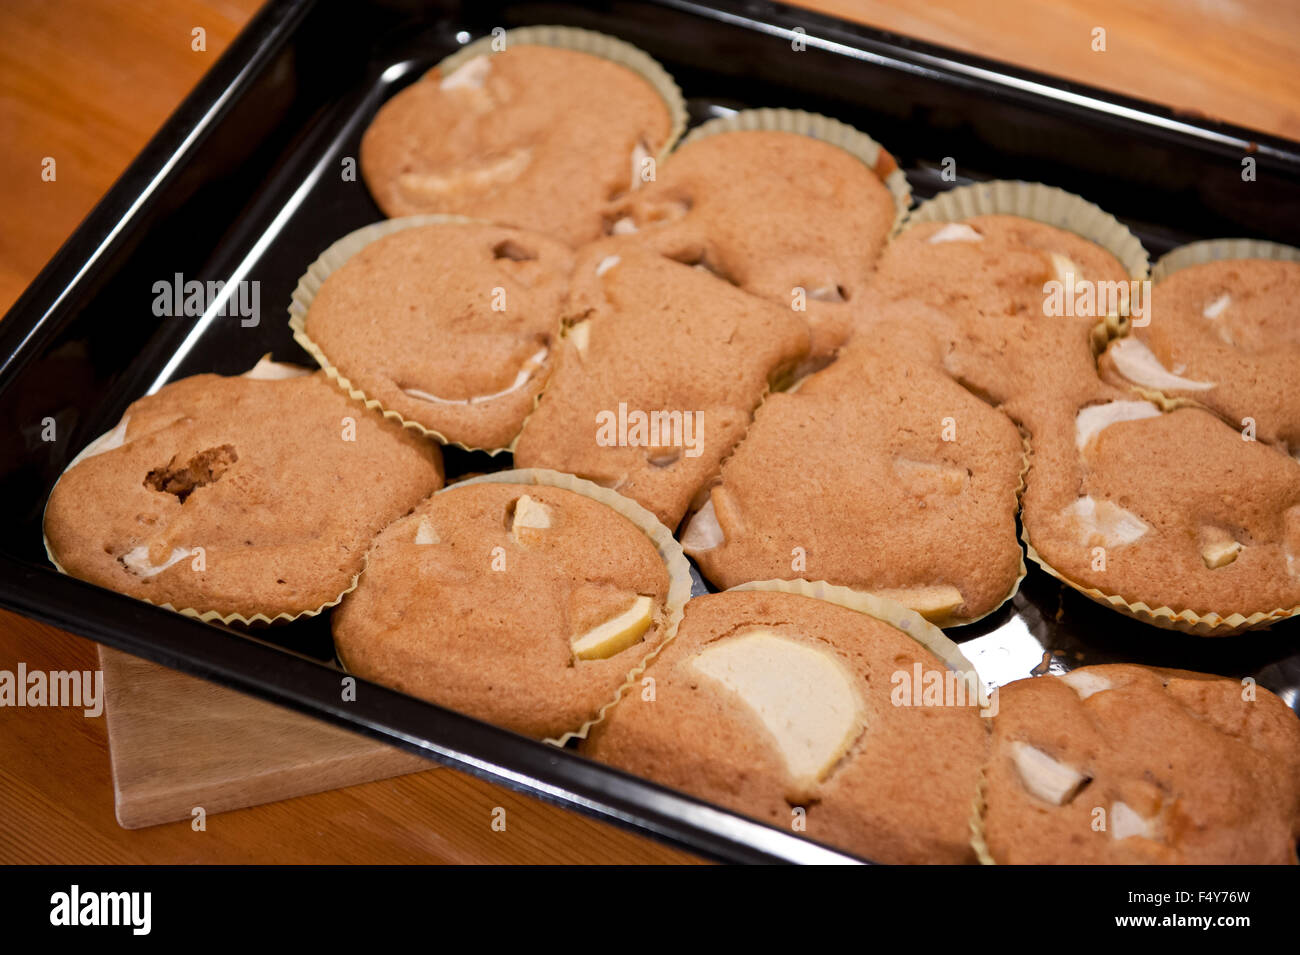 https://c8.alamy.com/comp/F4Y76W/failed-flat-muffins-disaster-cupcakes-in-paper-pan-liners-lying-on-F4Y76W.jpg